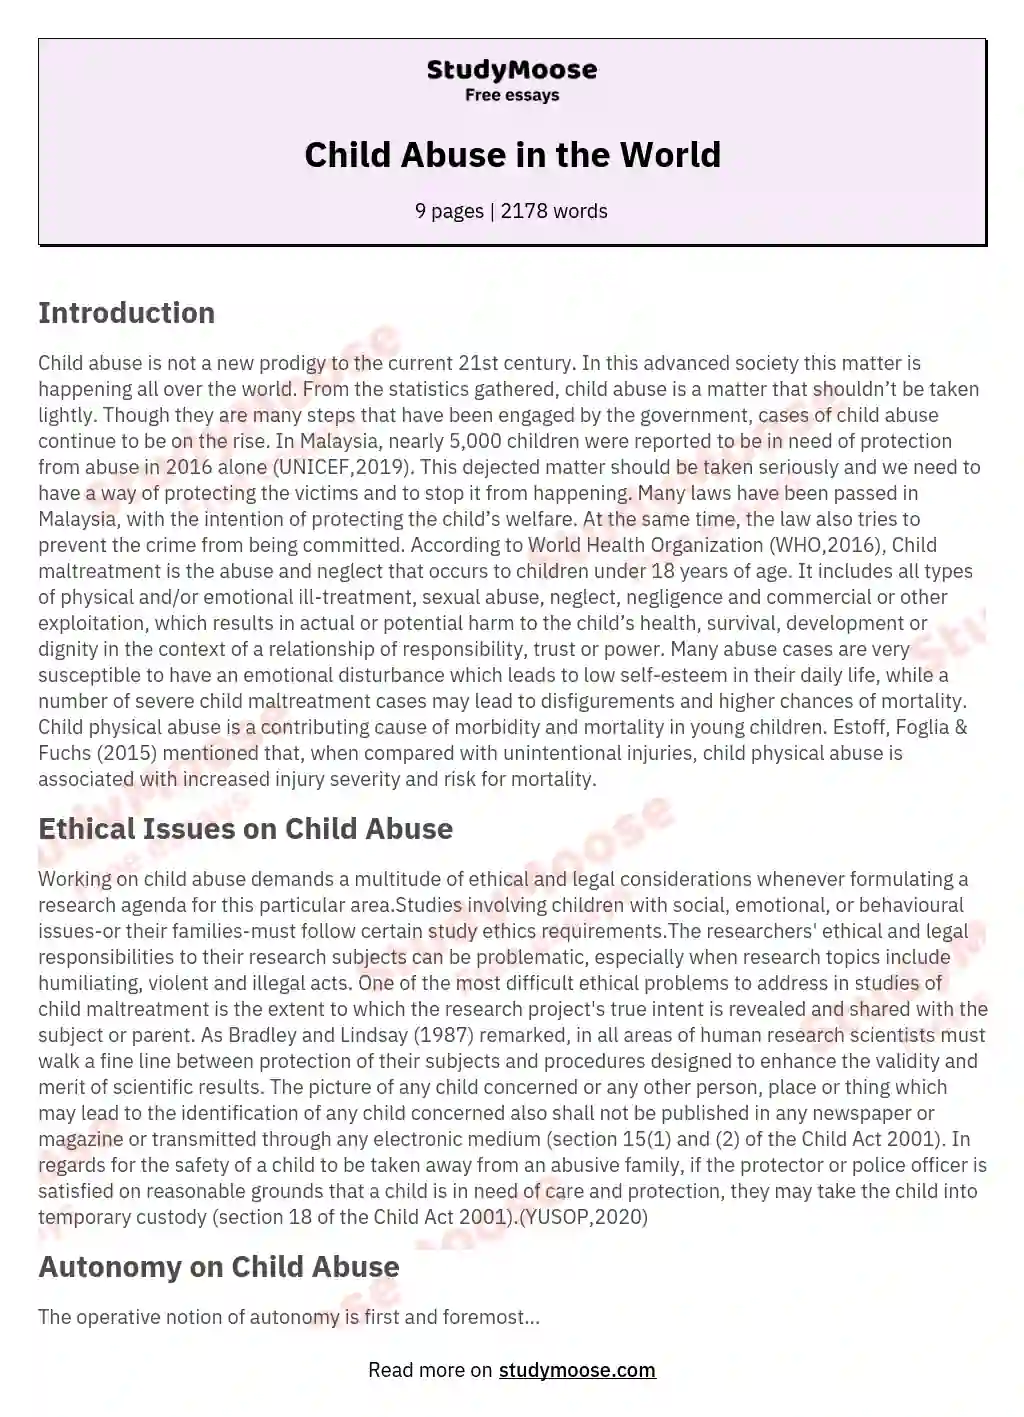 Child Abuse in the World essay